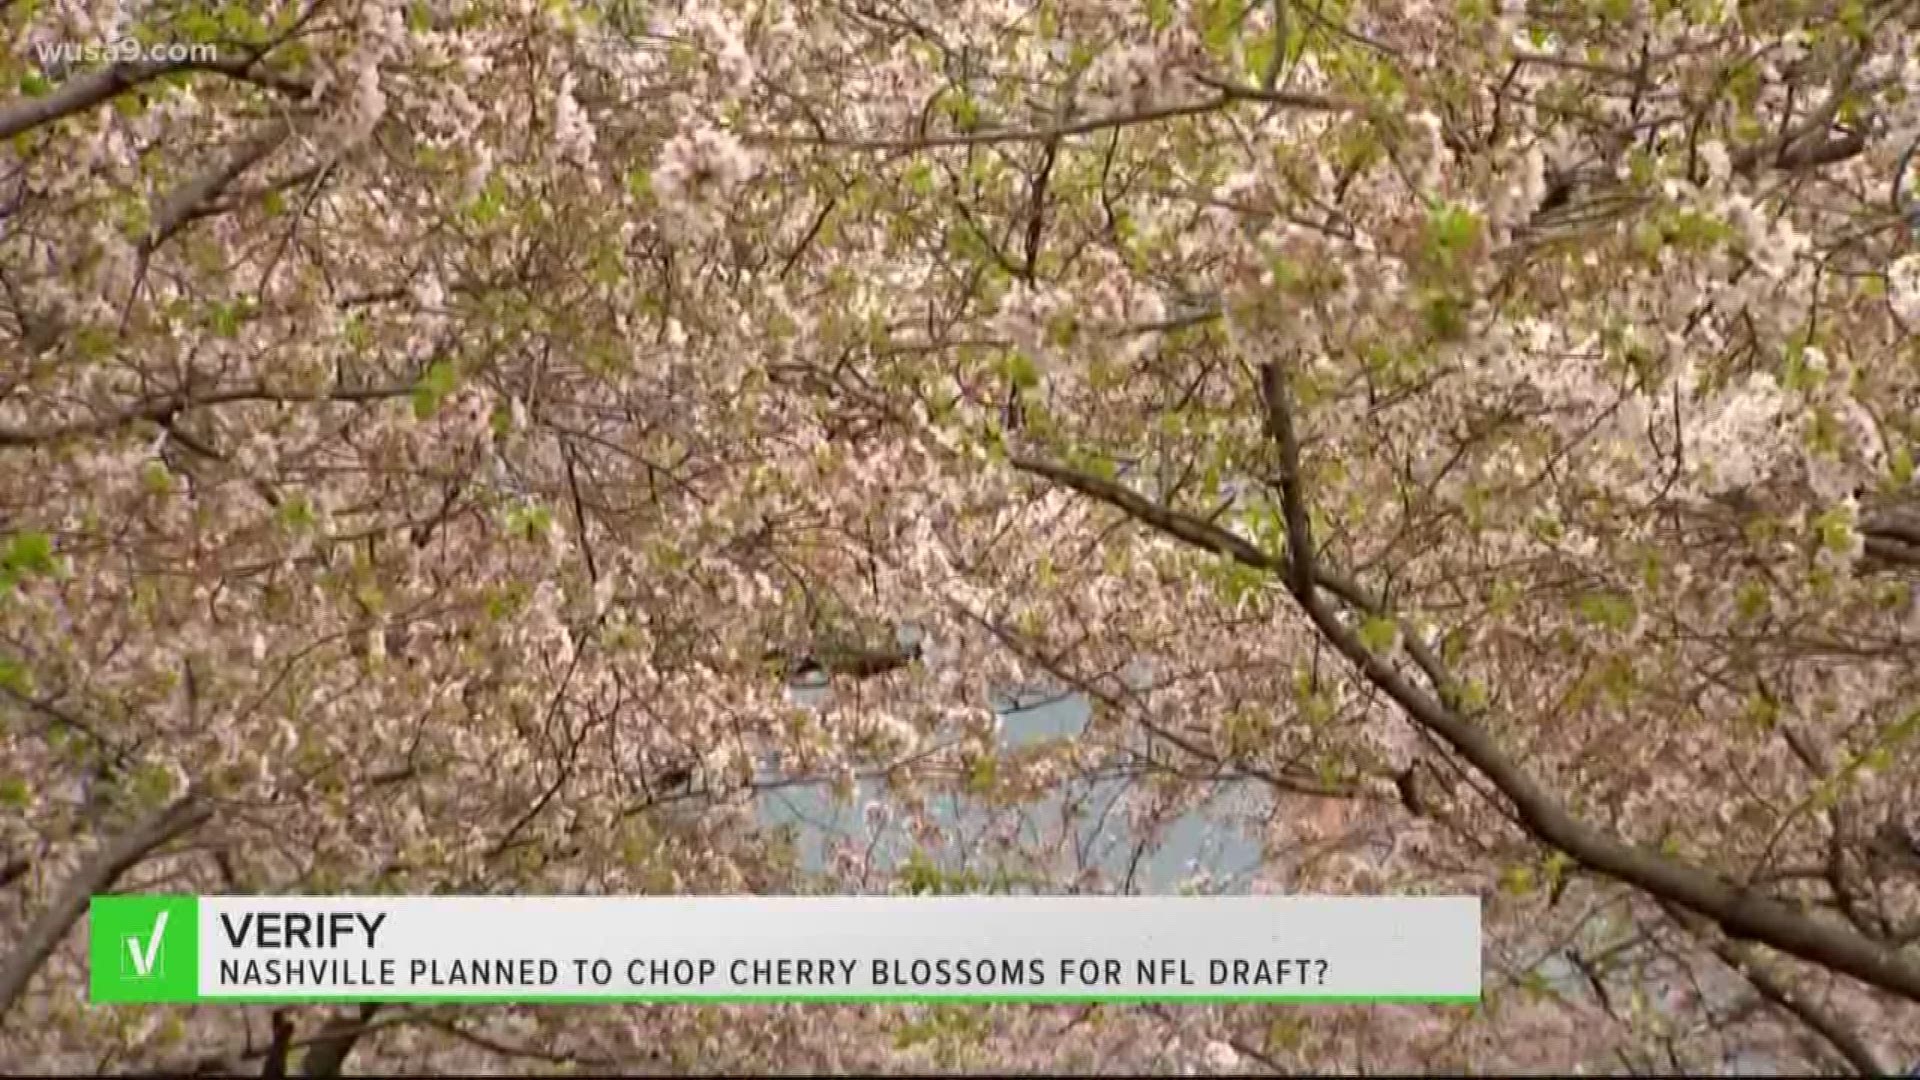 The city of Nashville planned to cut down cherry trees to put up a stage for the NFL draft, but public outcry stopped the plans.